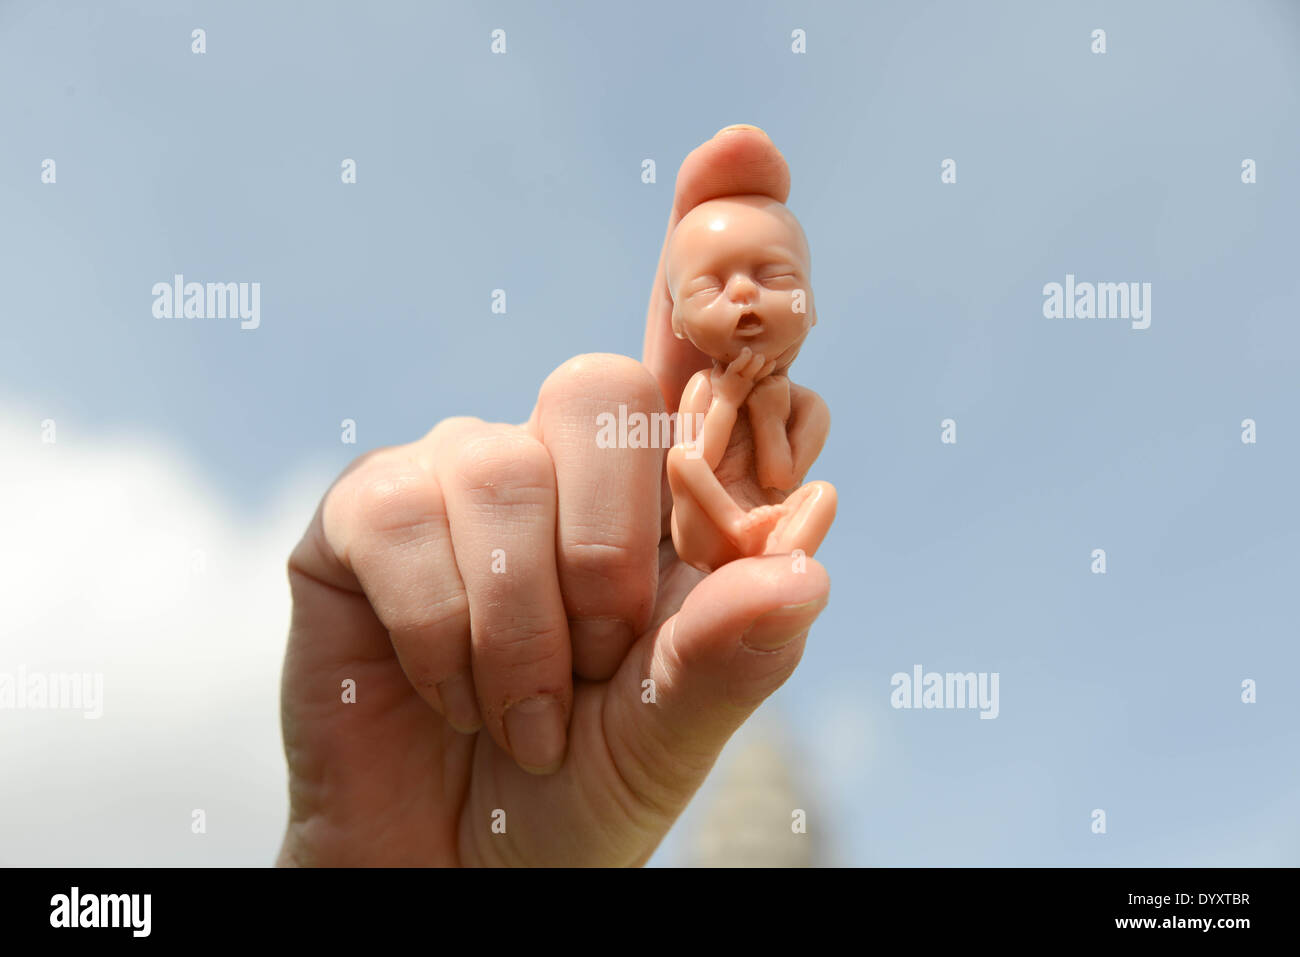 London England, 26th April 14 : Anti-abortions protest their 40th birthday opposite Parliament cries foetus is a human being and got the right to live and birth. 828 abortions in UK every working day. Stop the wickedness behaviors of man-kind murderess in London.  Credit:  See Li/Alamy Live News Stock Photo